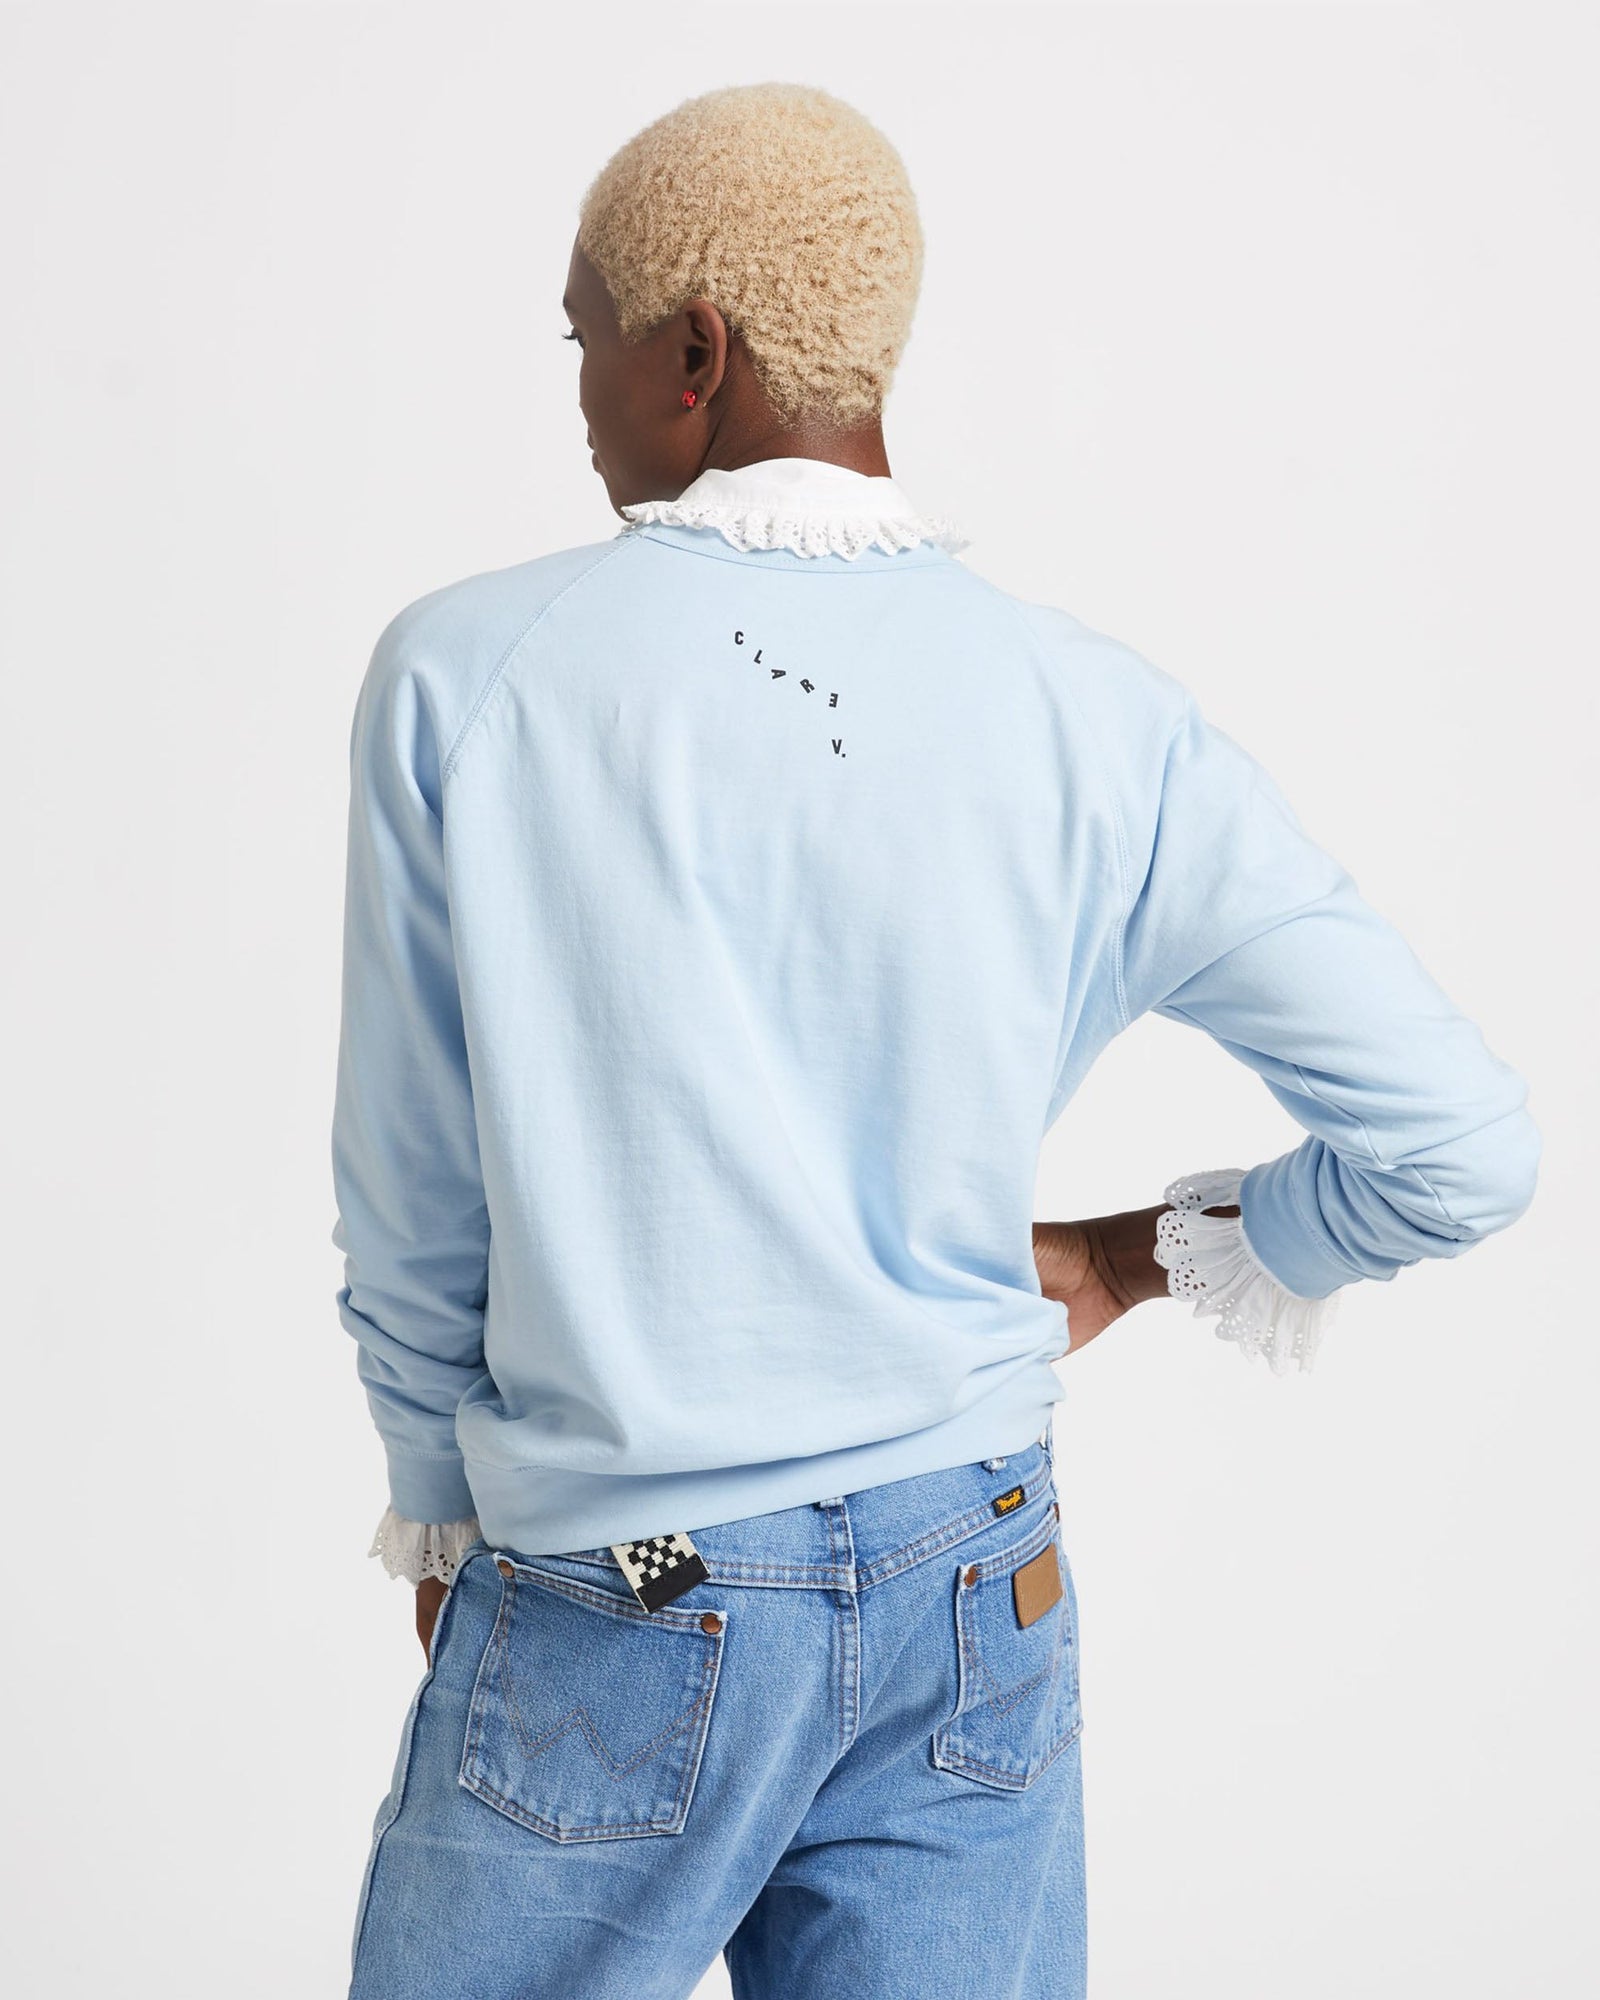 Back View of the Light Blue with Black Embroidered Charmant Sweatshirt on Kimberlee